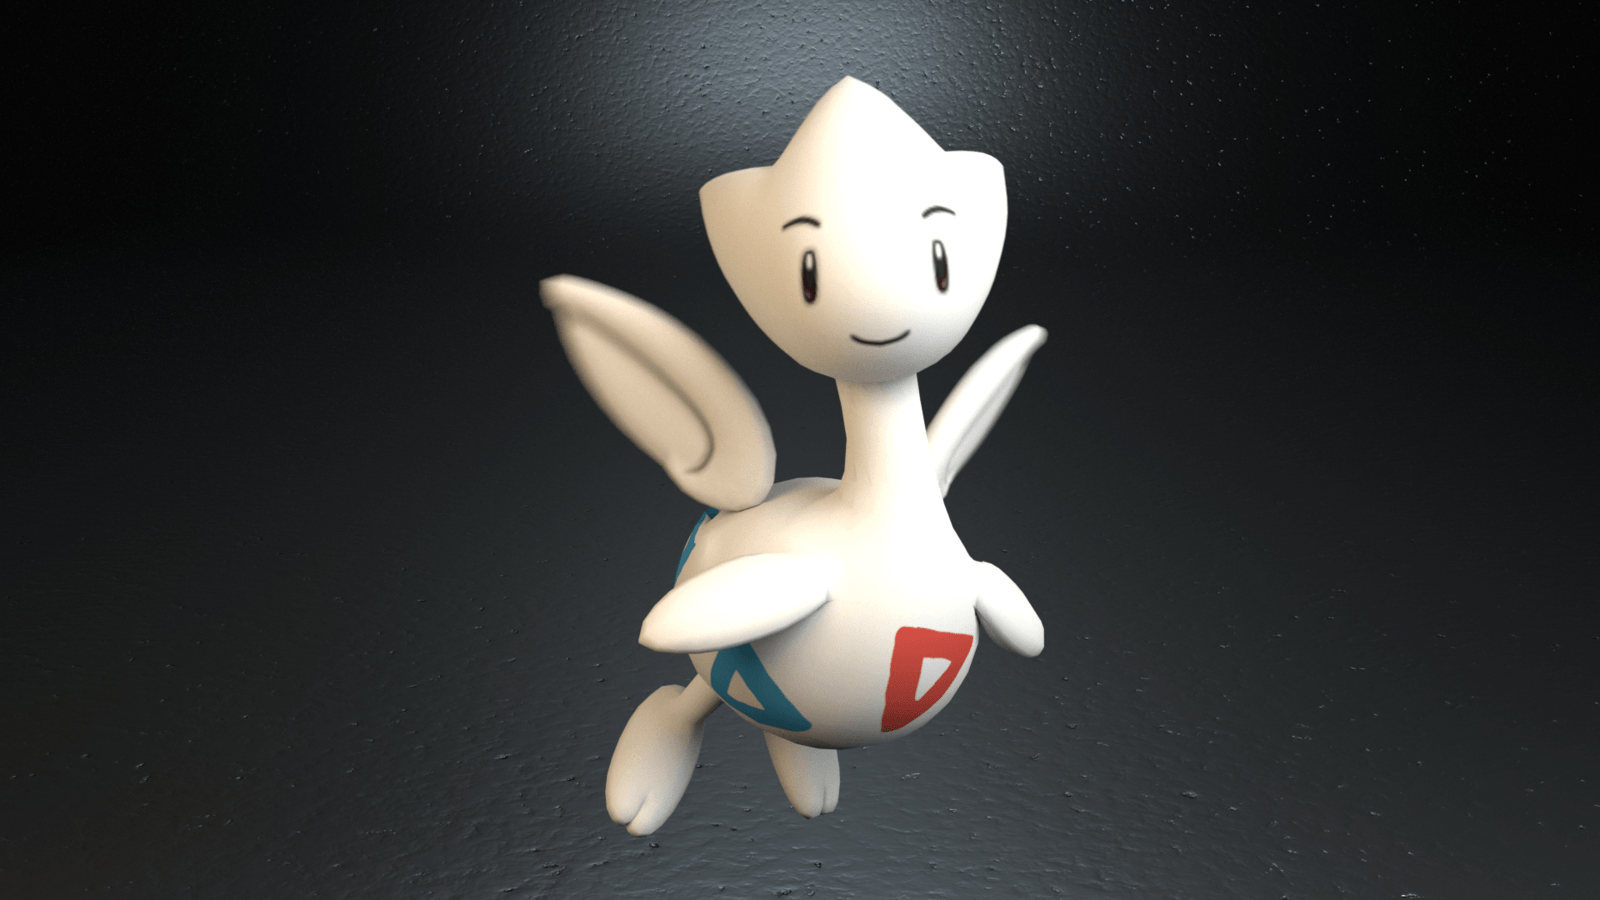 176. Togetic